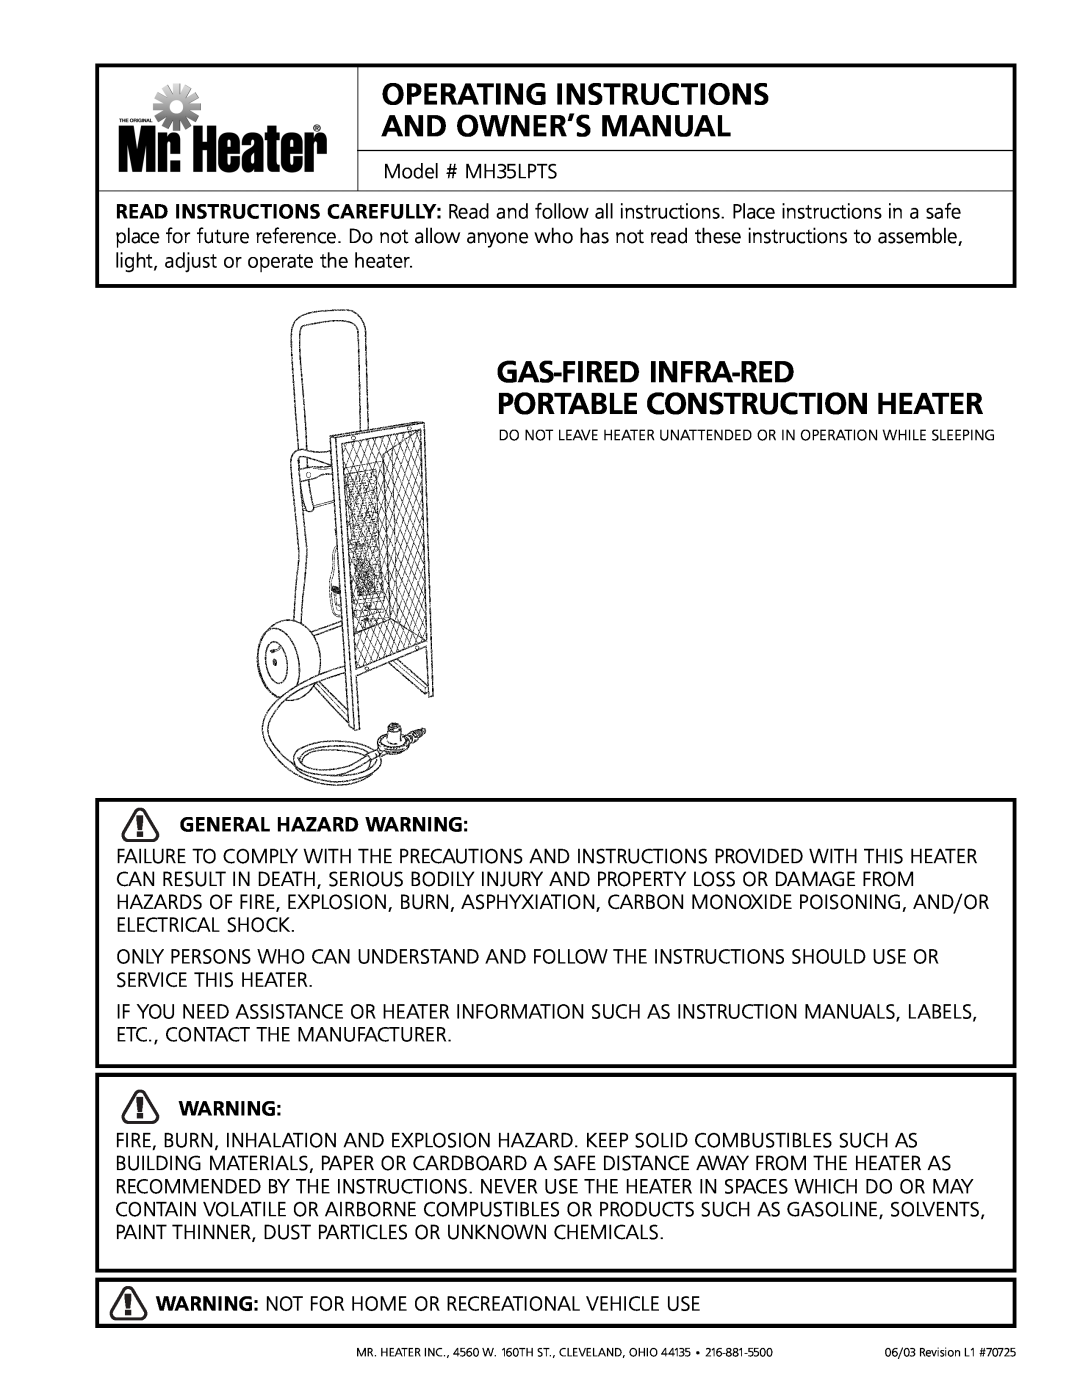 Mr. Heater MH35LPTS owner manual Gas-Fired Infra-Red Portable Construction Heater, General Hazard Warning 